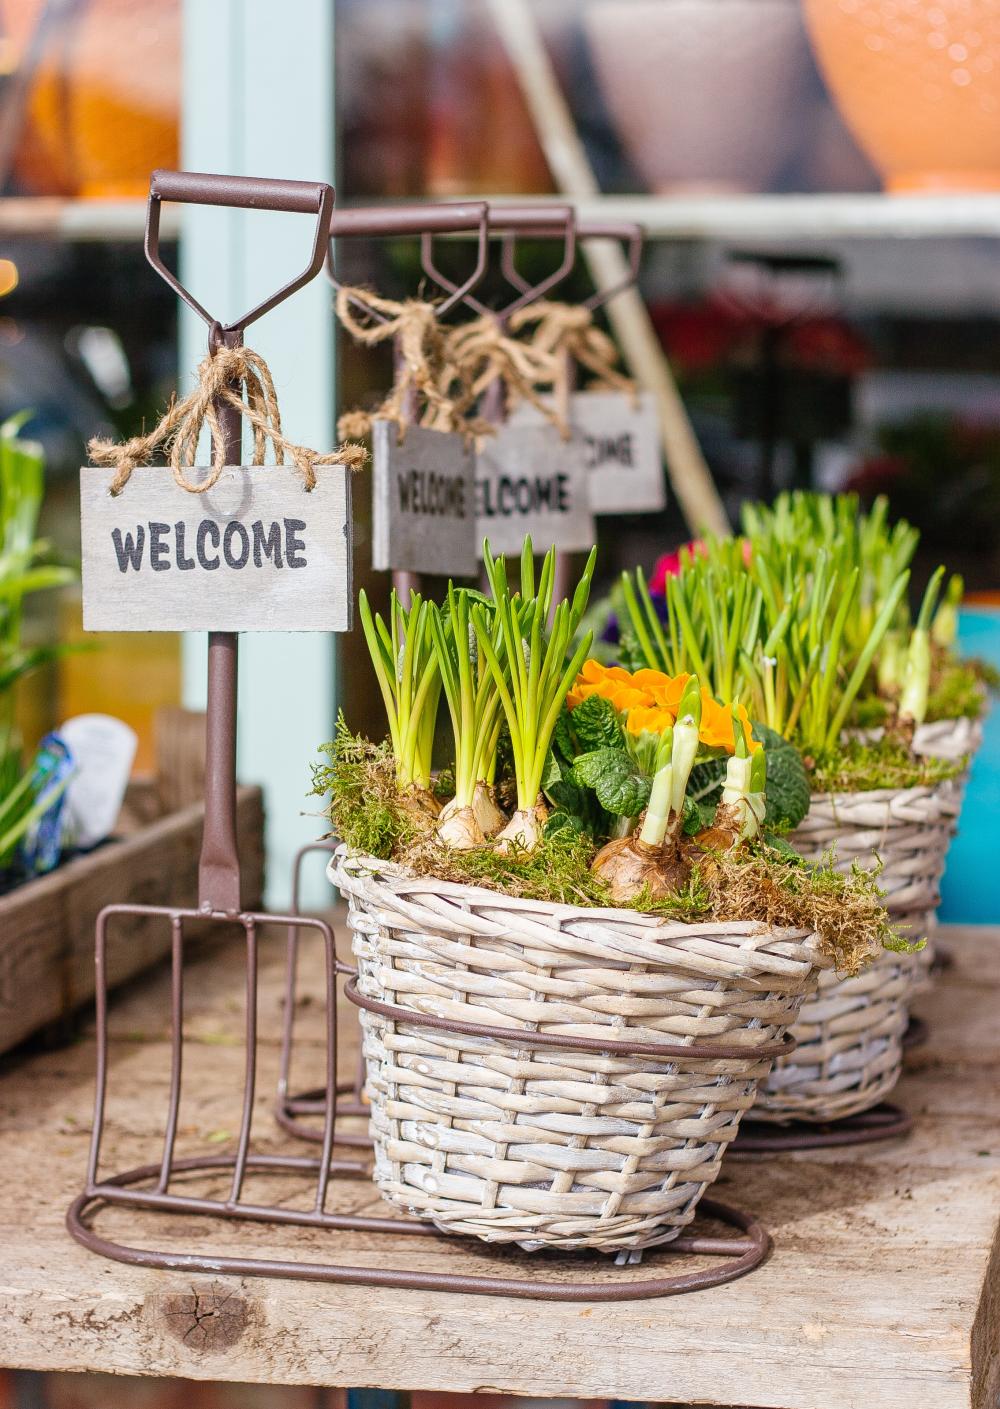 Veggie decor with welcome signs 